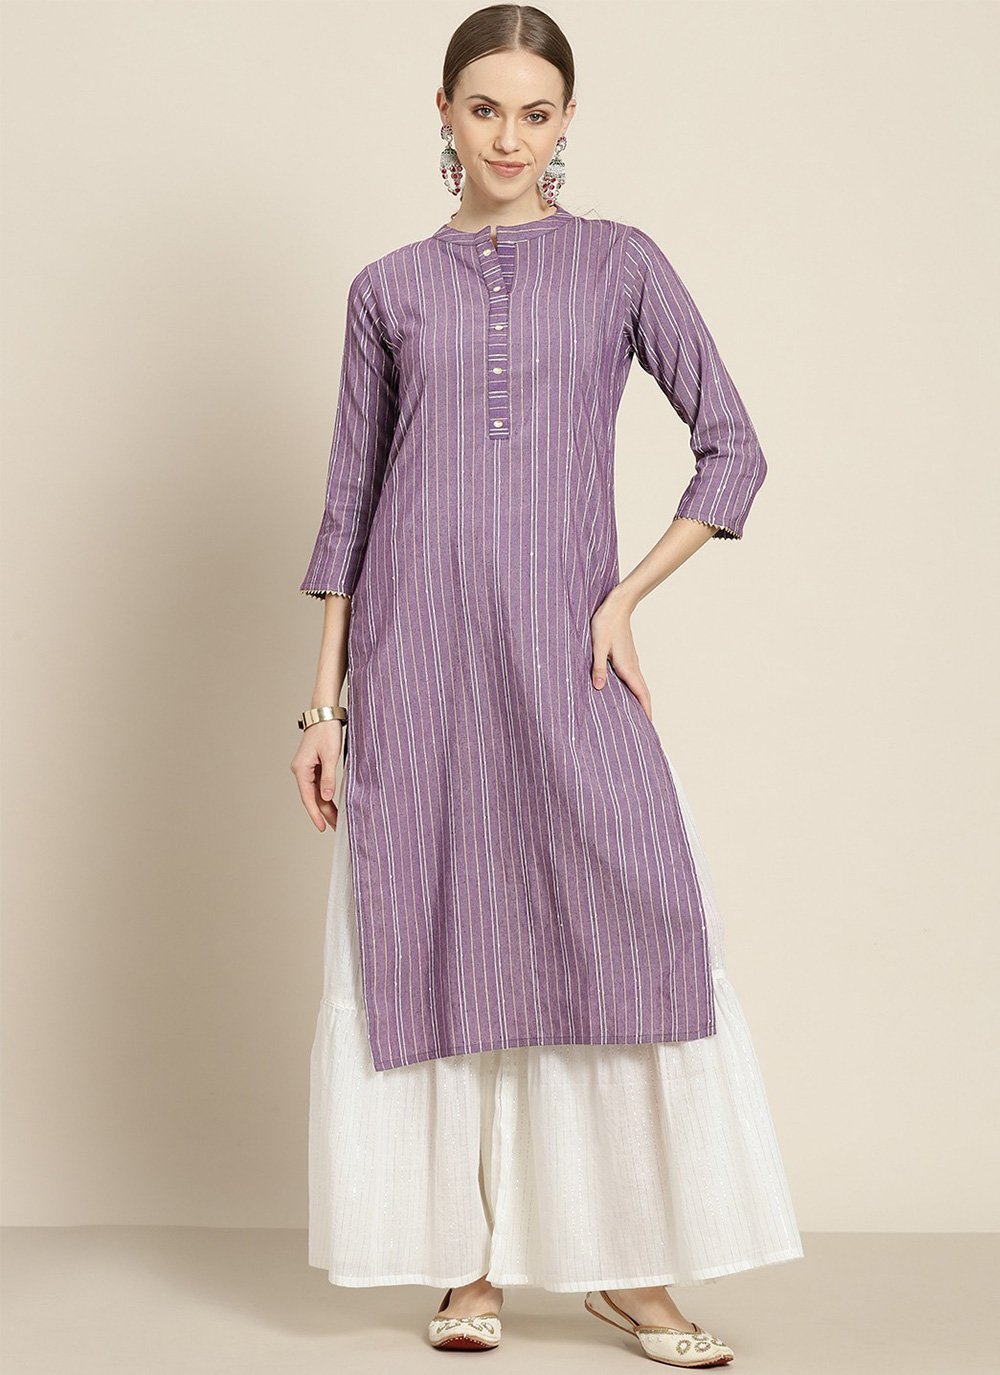 Poly Cotton Designer Kurti in Mauve Enhanced with Embroidered